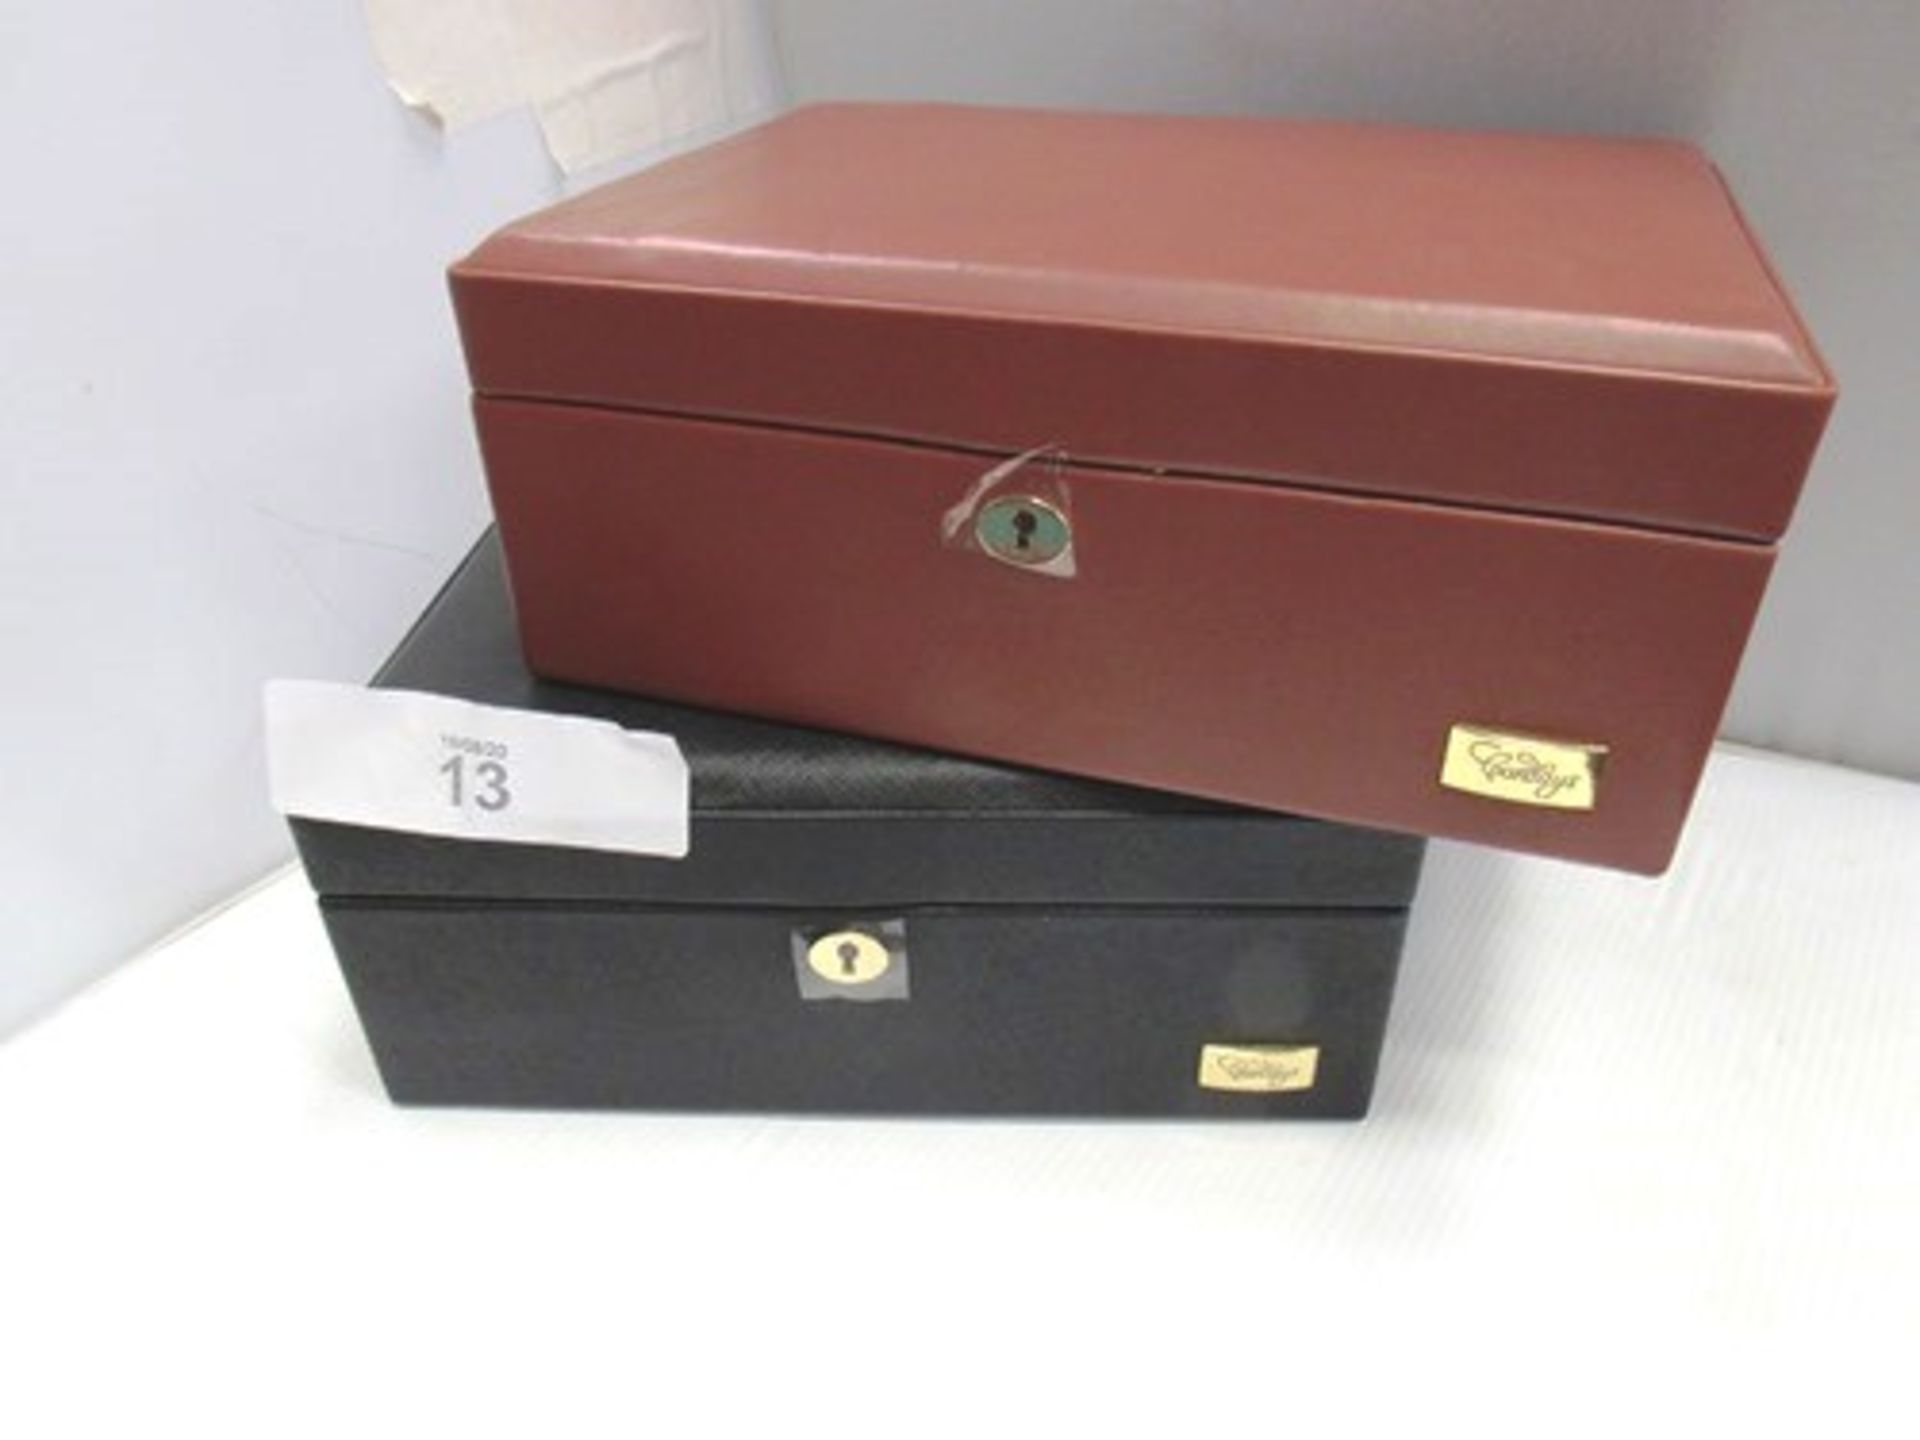 5 x Cordays jewellery cases, assorted colours and sizes - New (C6C) - Image 3 of 3